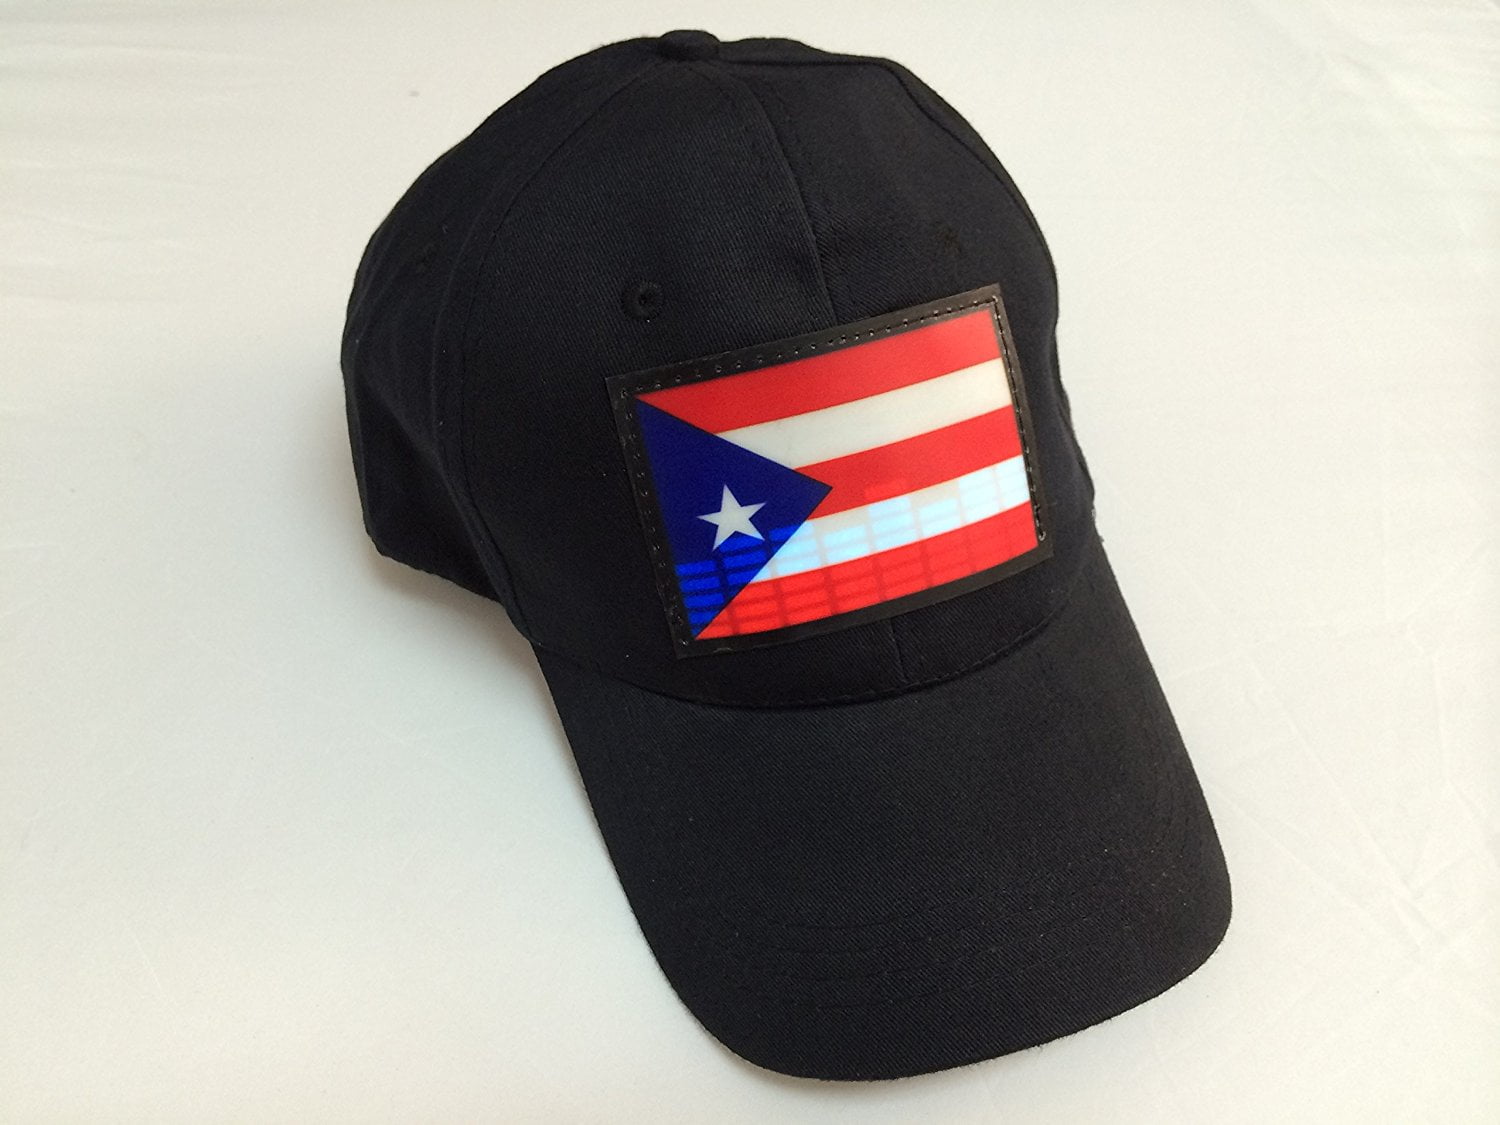 SOUND Activated FLASHING LED LIGHT UP PUERTO RICAN PUERTO RICO FLAG DJ PARTY HAT